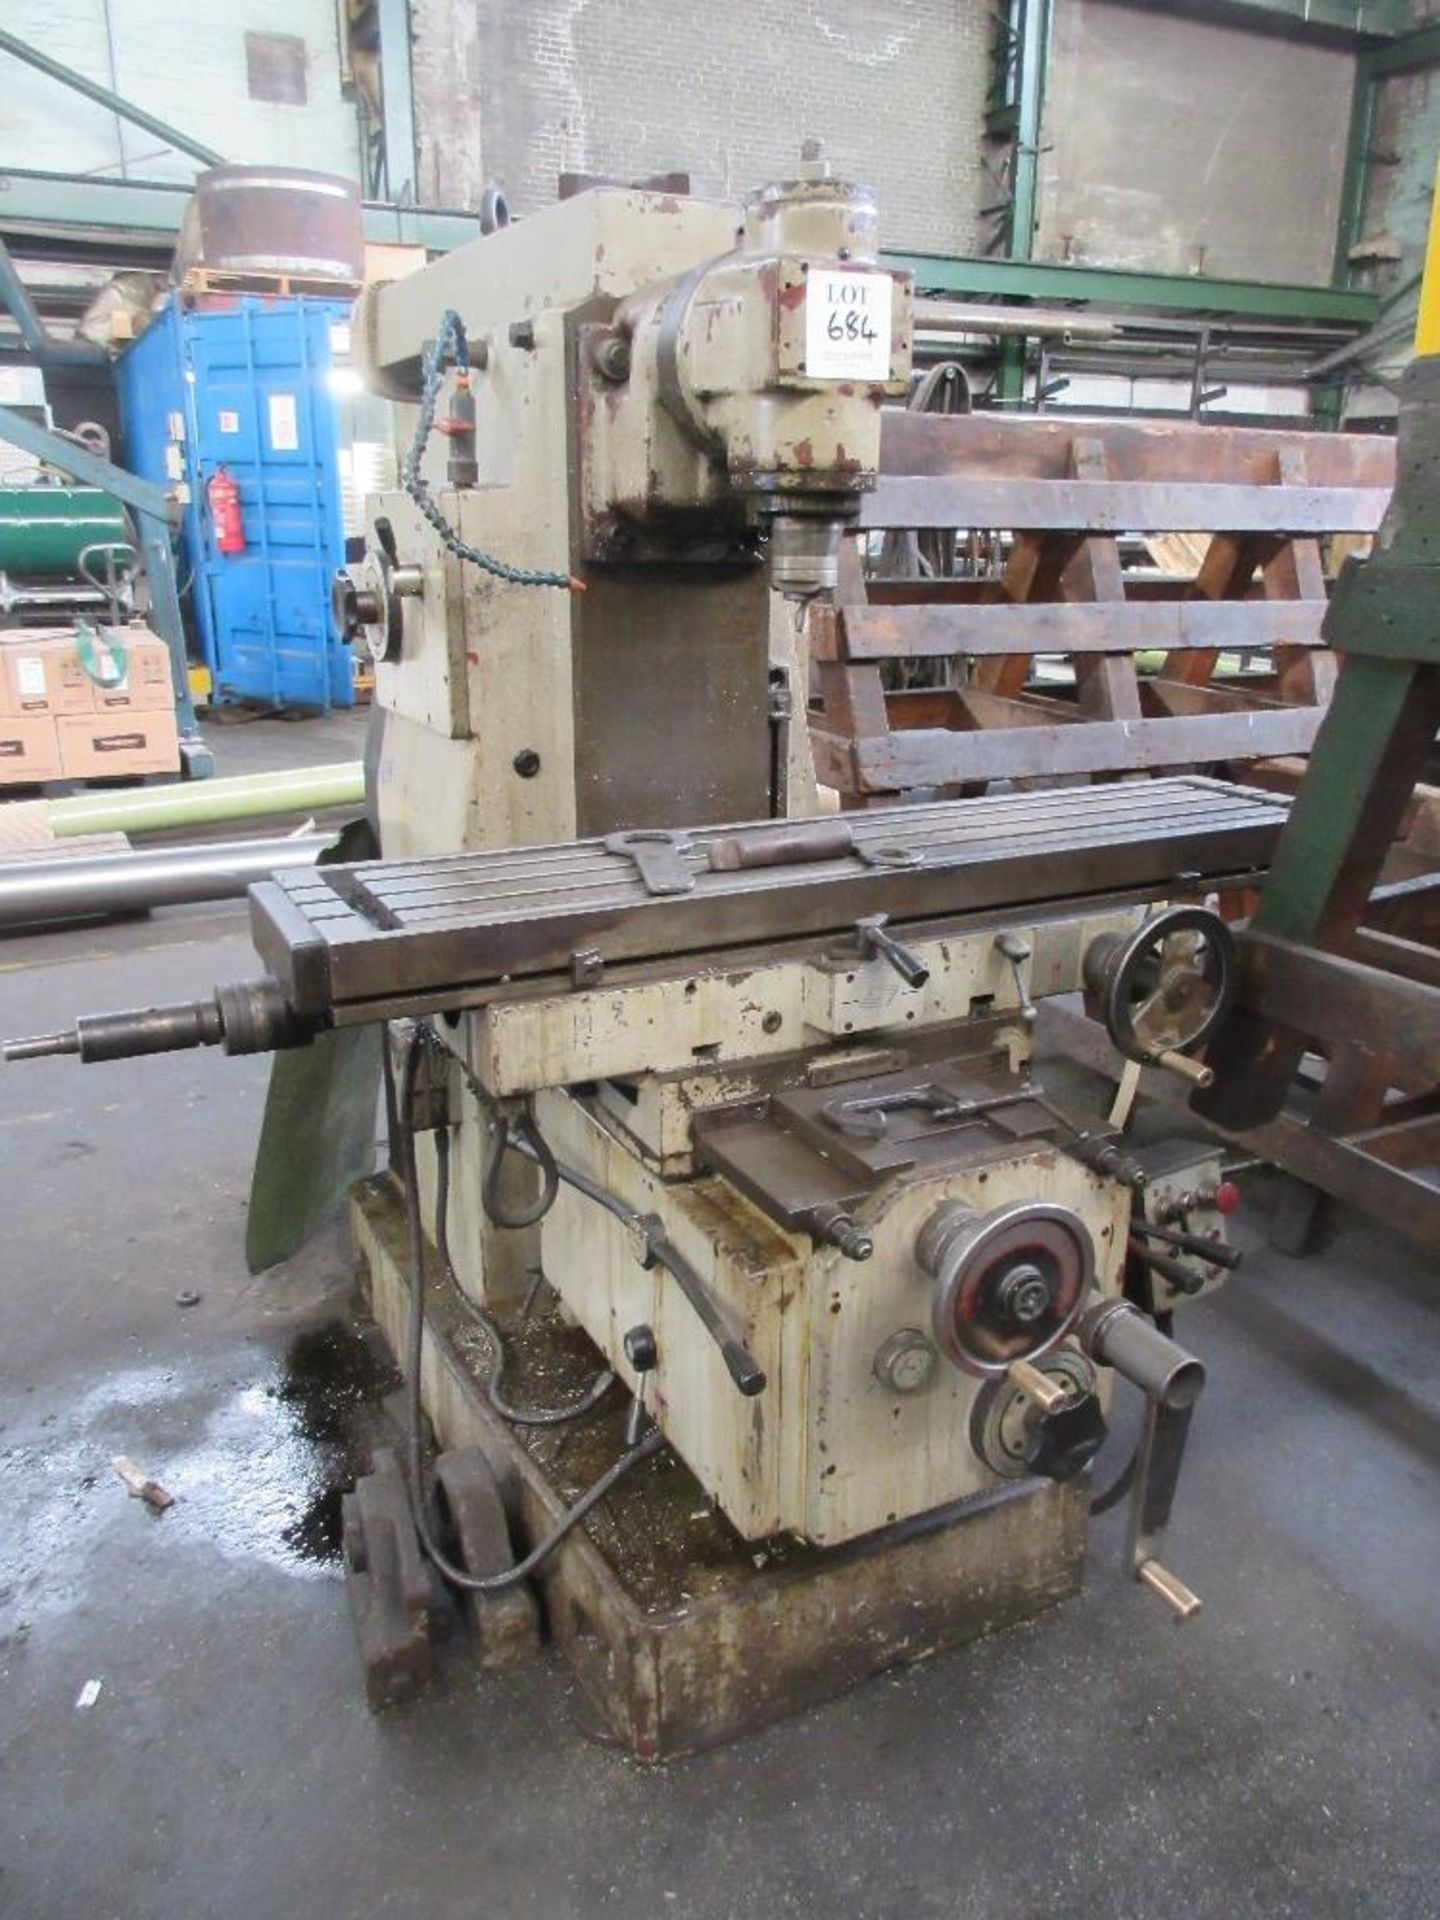 Universal milling machine, table size 310 x 1400mm (METHOD STATEMENT & RISK ASSESSMENT REQUIRED)